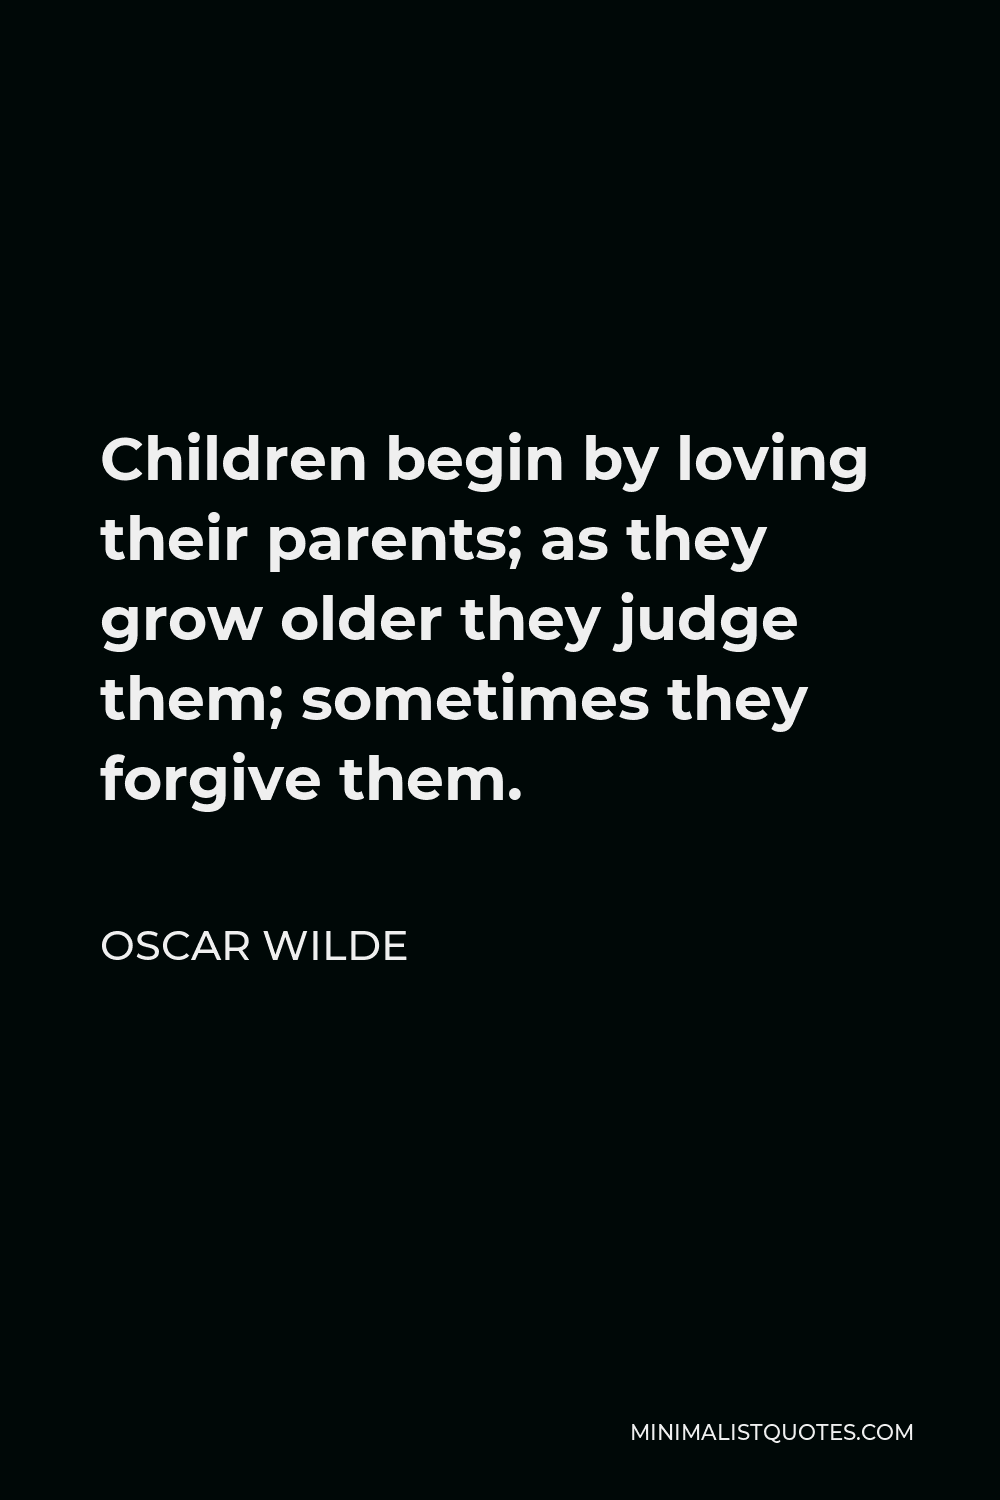 Oscar Wilde Quote - Children begin by loving their parents; as they grow older they judge them; sometimes they forgive them.